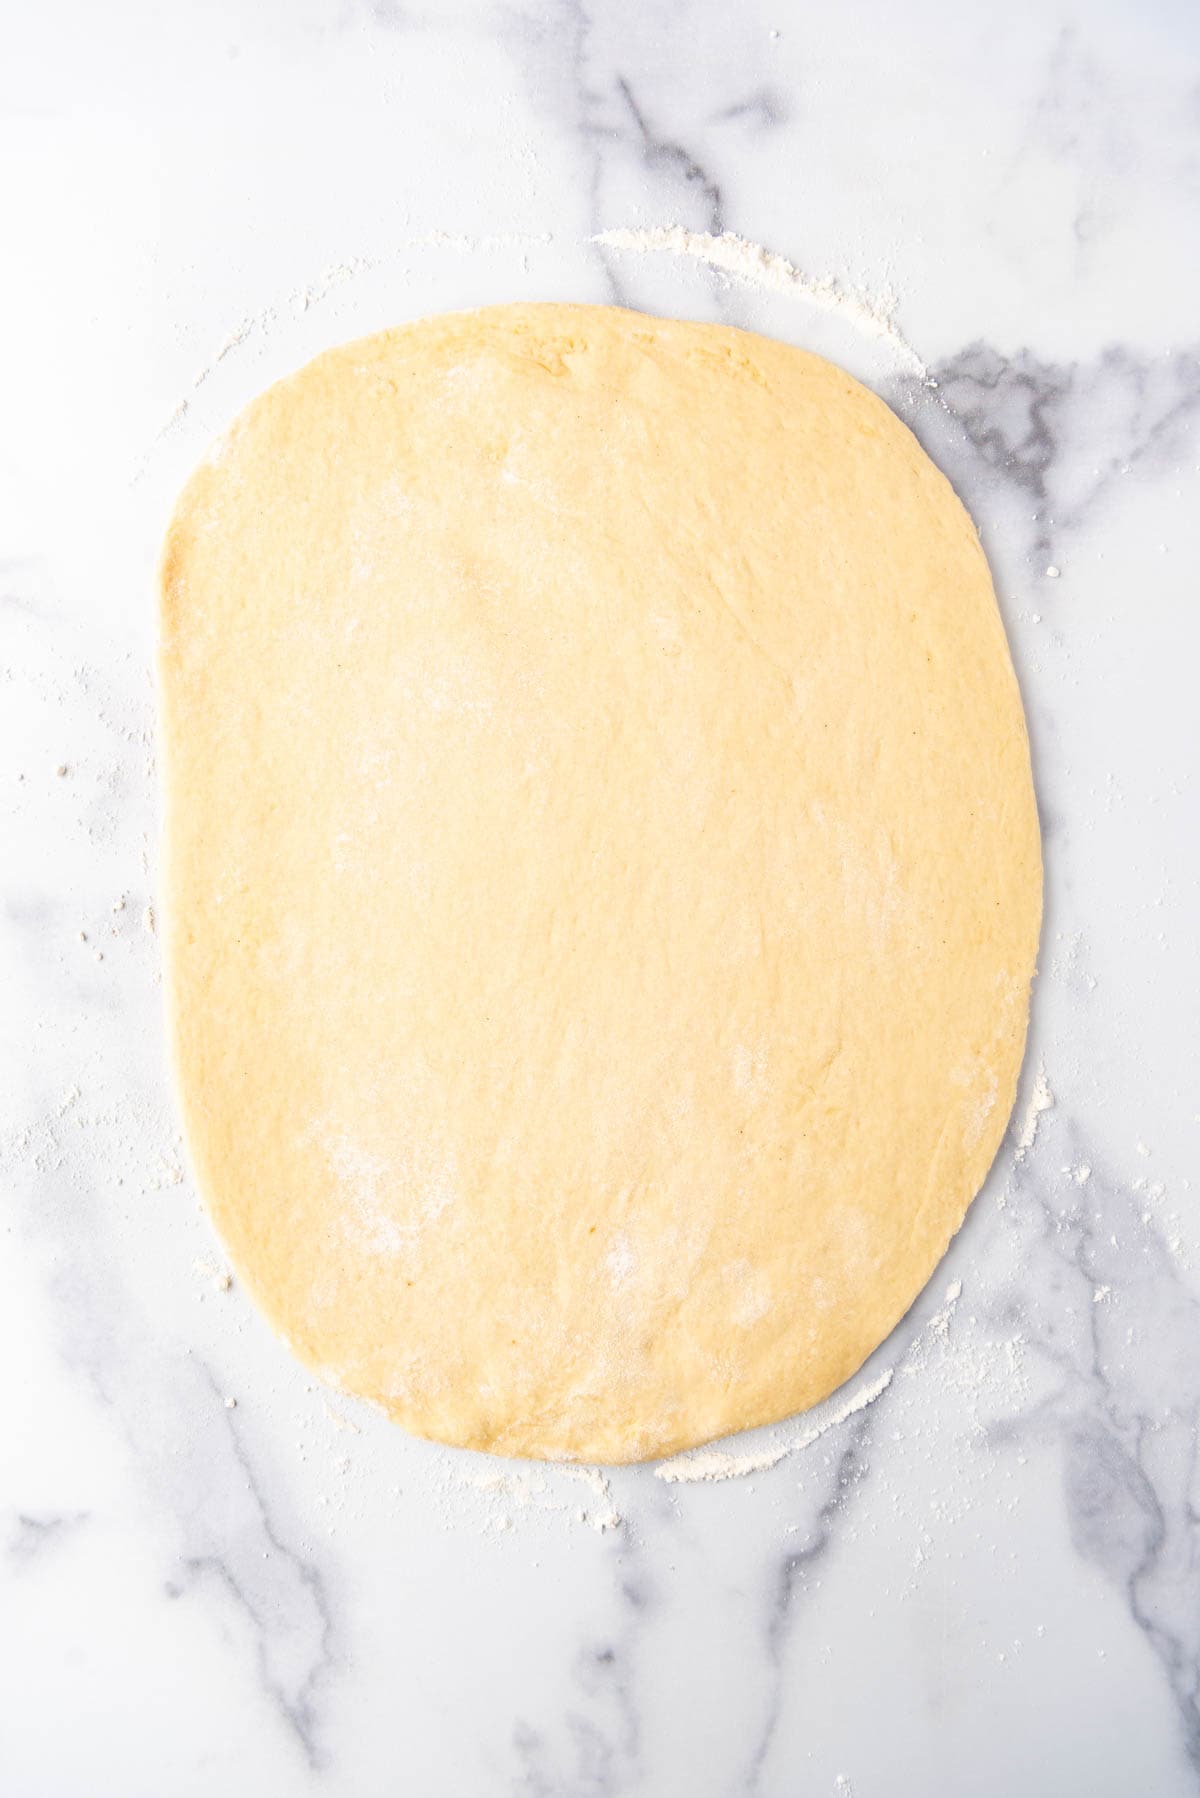 Rolling out cinnamon roll dough on a clean white marble surface.